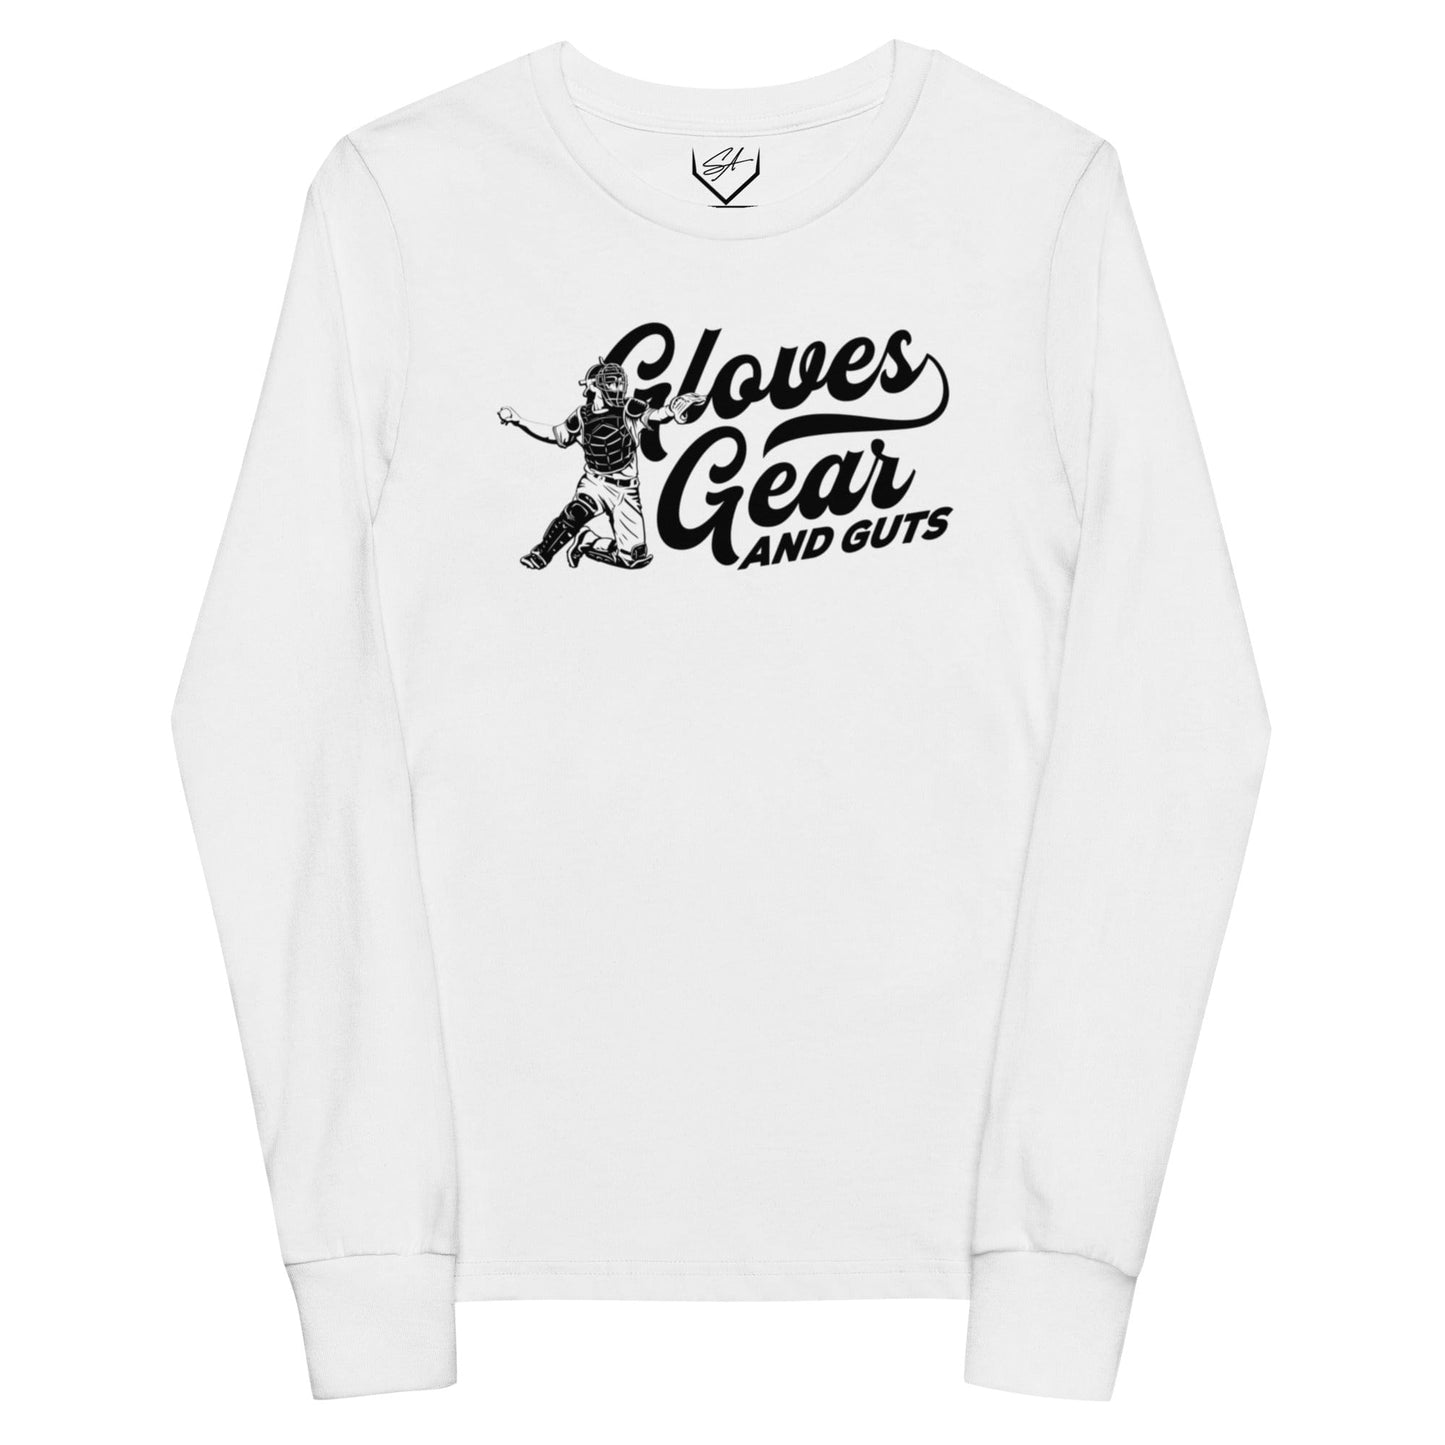 Gloves Gear And Guts - Youth Long Sleeve